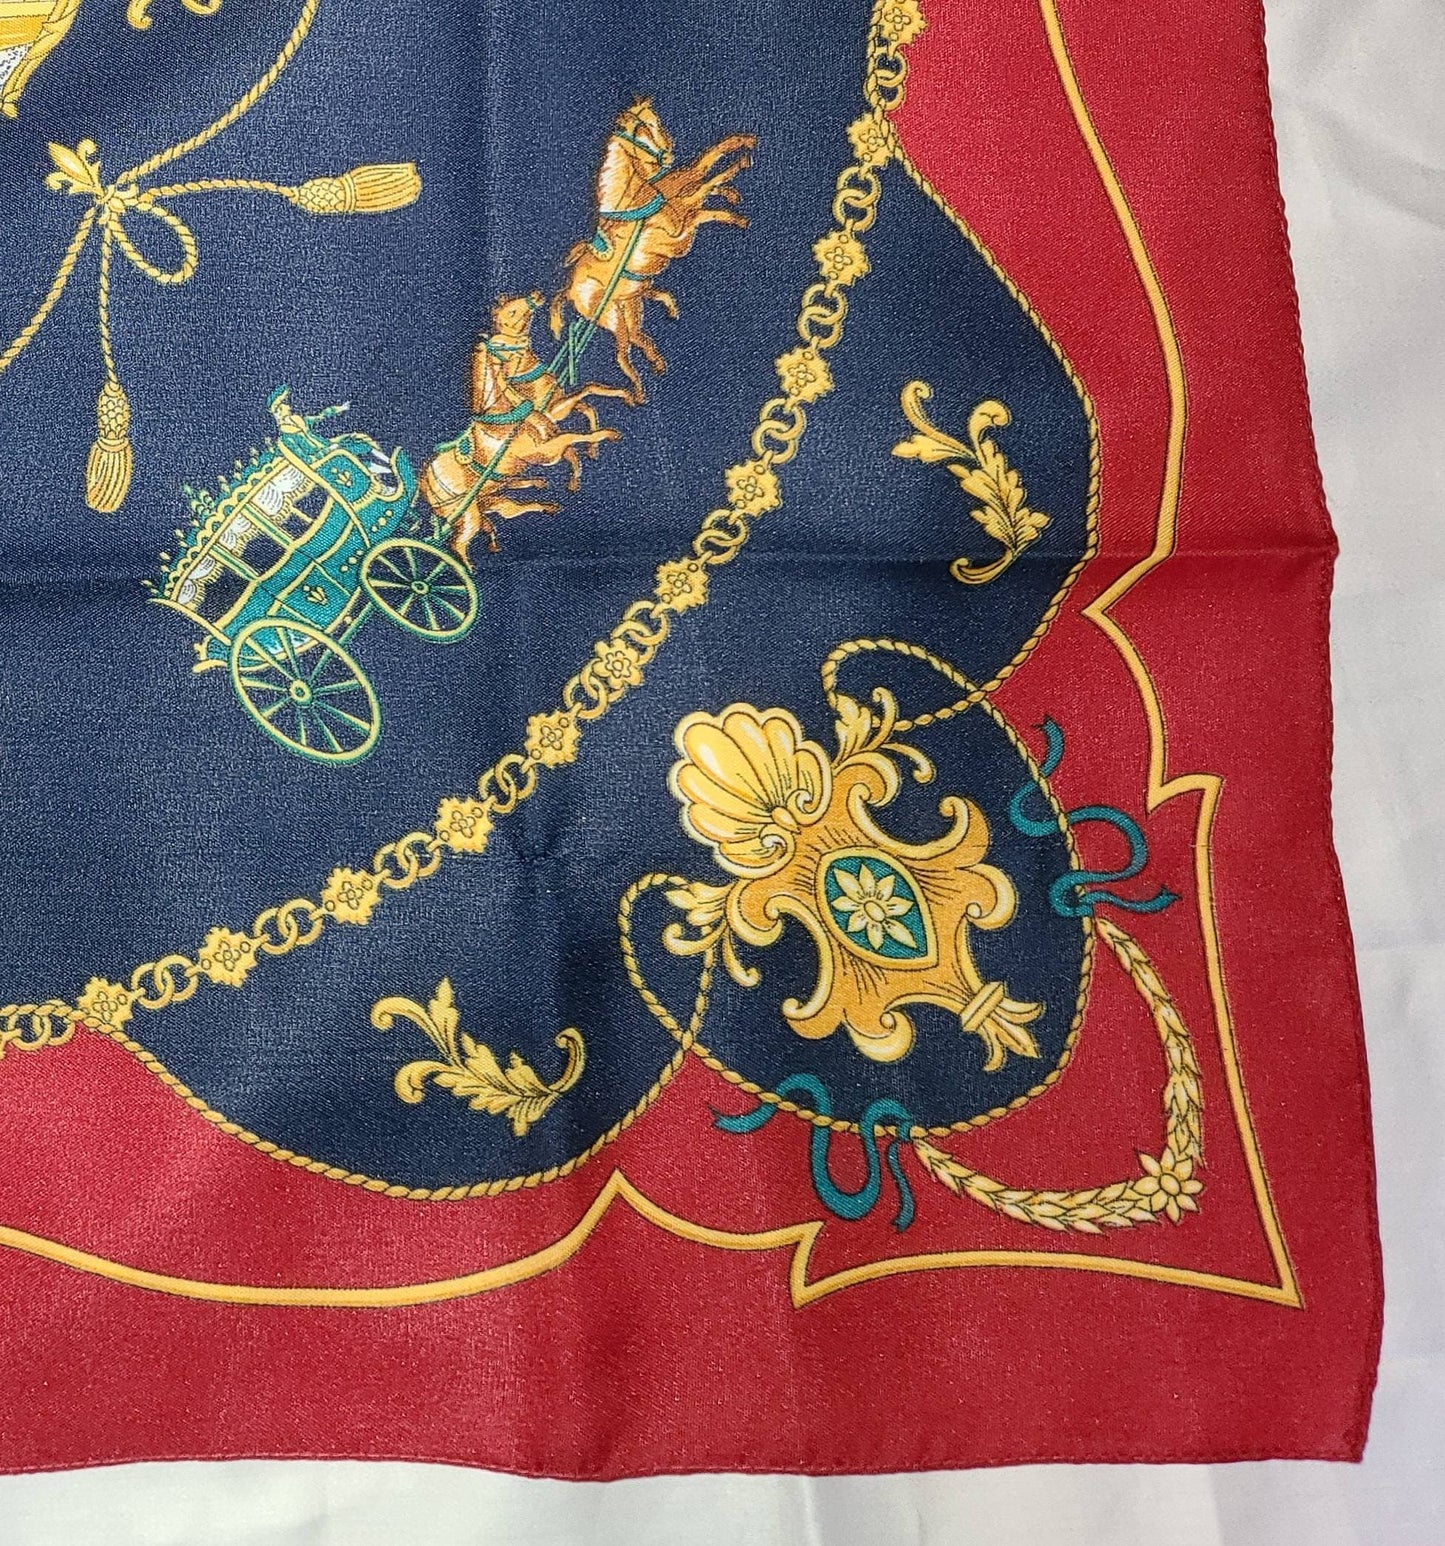 Vintage Equestrian Scarf 1960s 70s Thin Rayon Dark Blue Gold Red Horse Building Print Scarf Famous Building Boho 29.5 x 30.5 in.